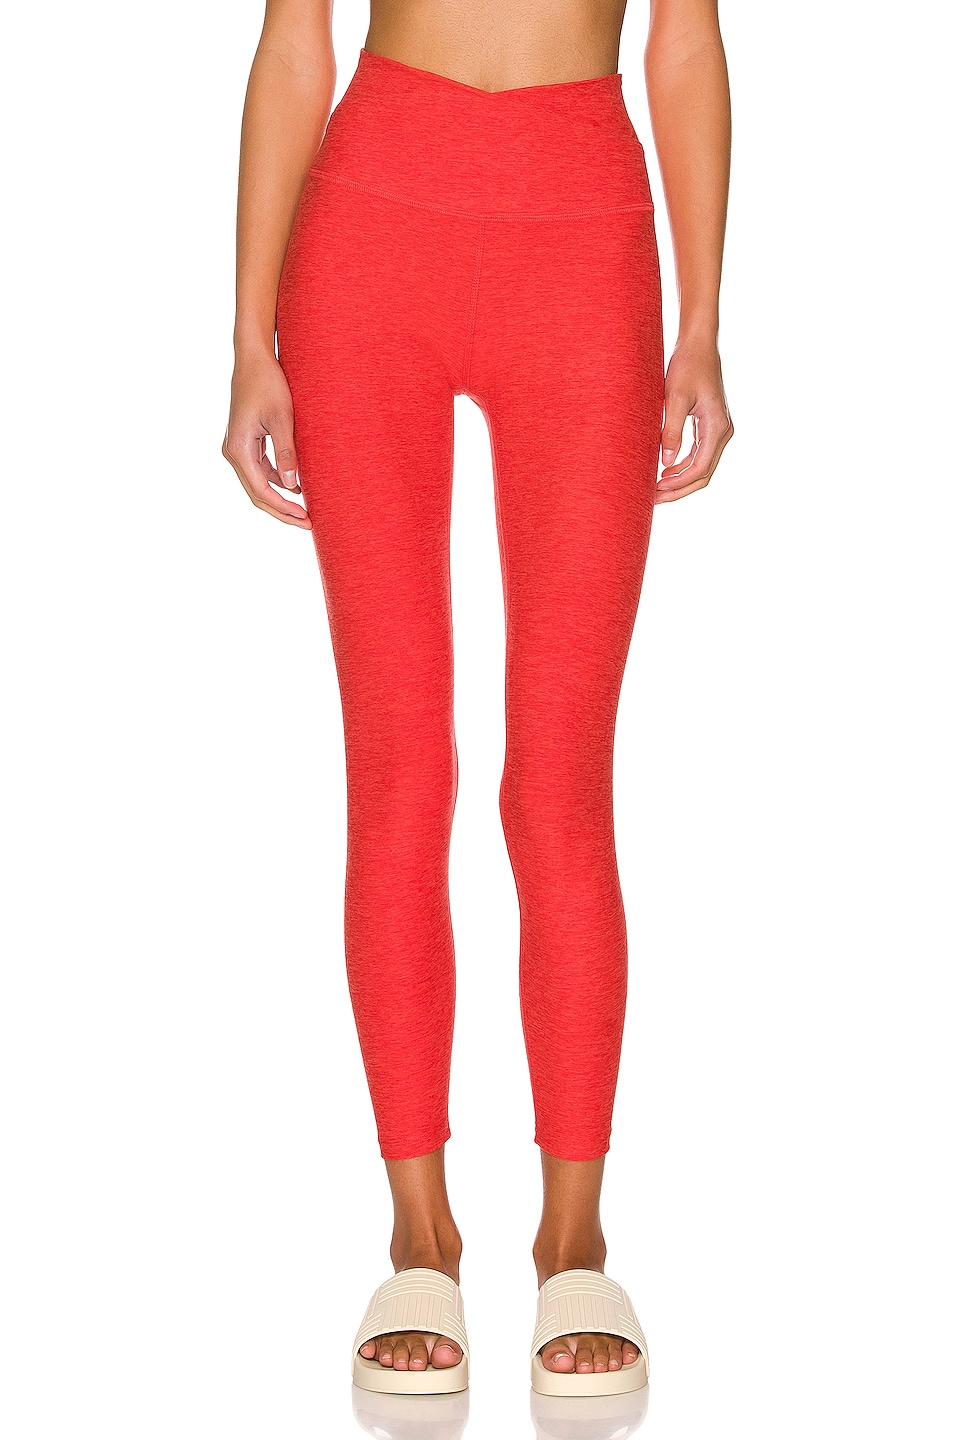 Image 1 of Beyond Yoga Spacedye At Your Leisure High Waisted Legging in Redflower Scarlet